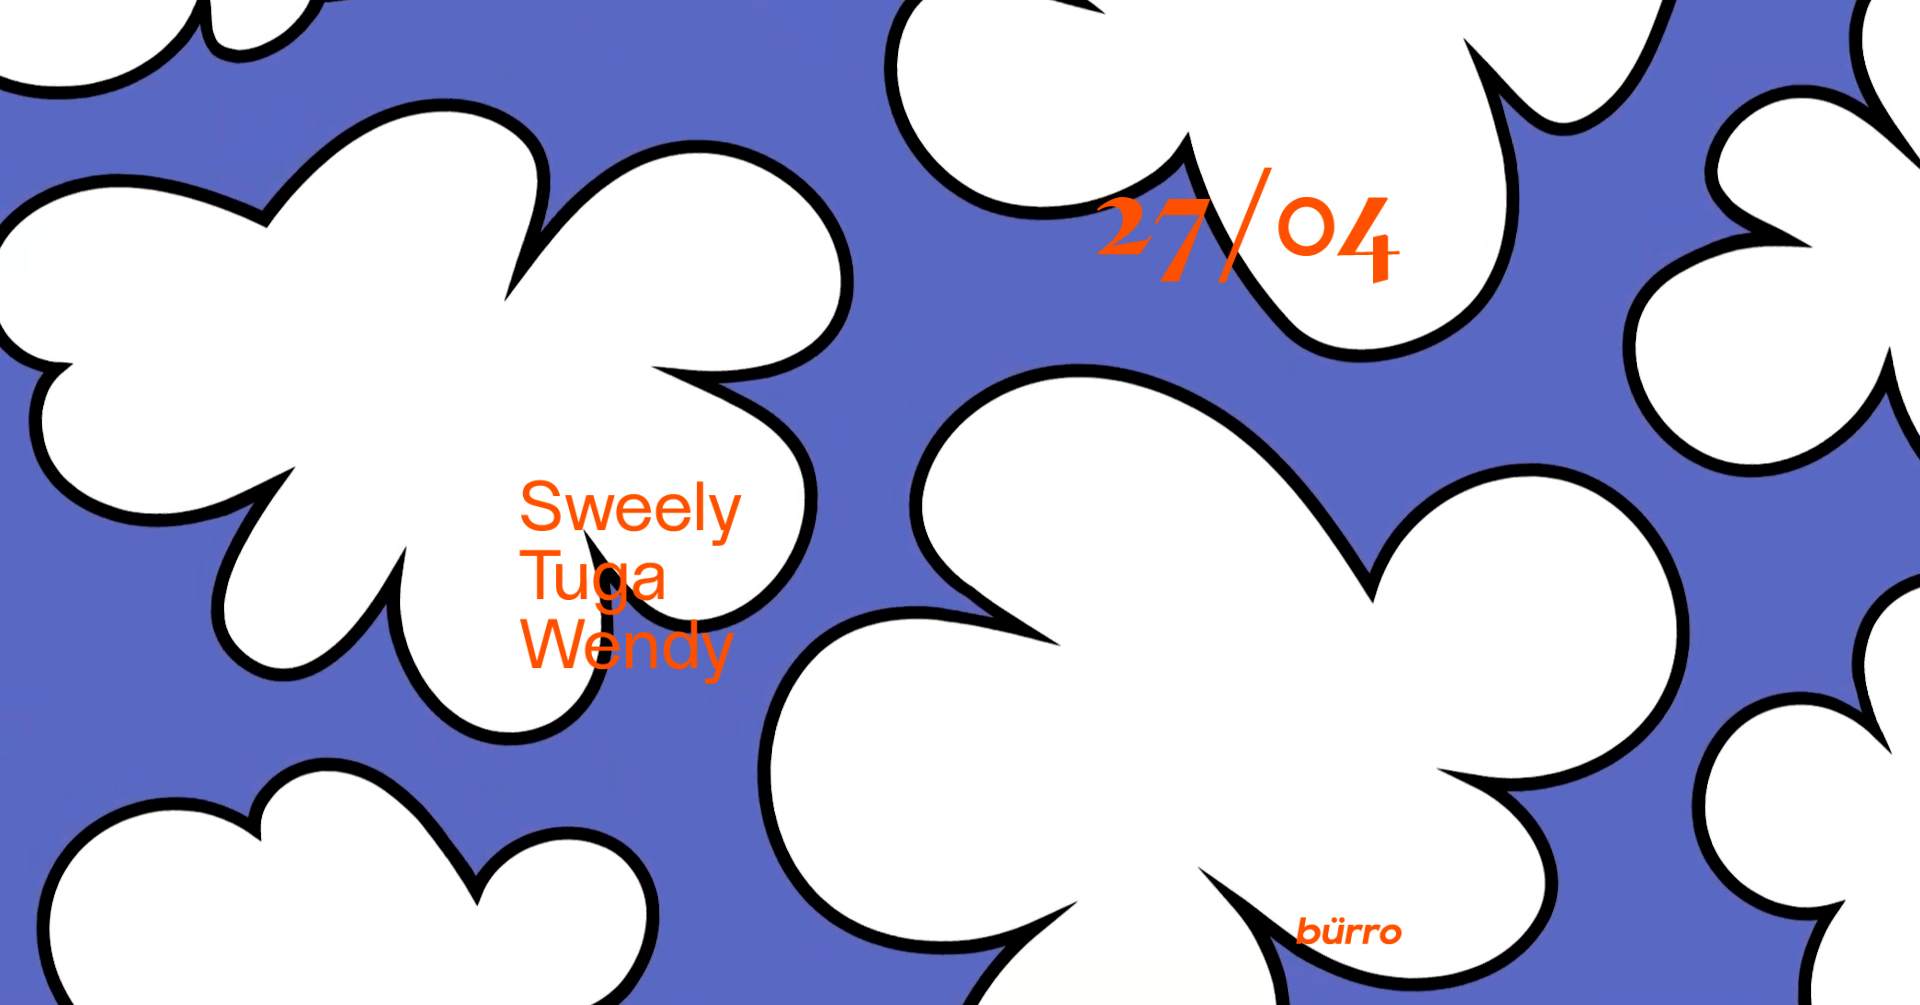 bürro with Sweely, Tuga, Wendy - フライヤー表